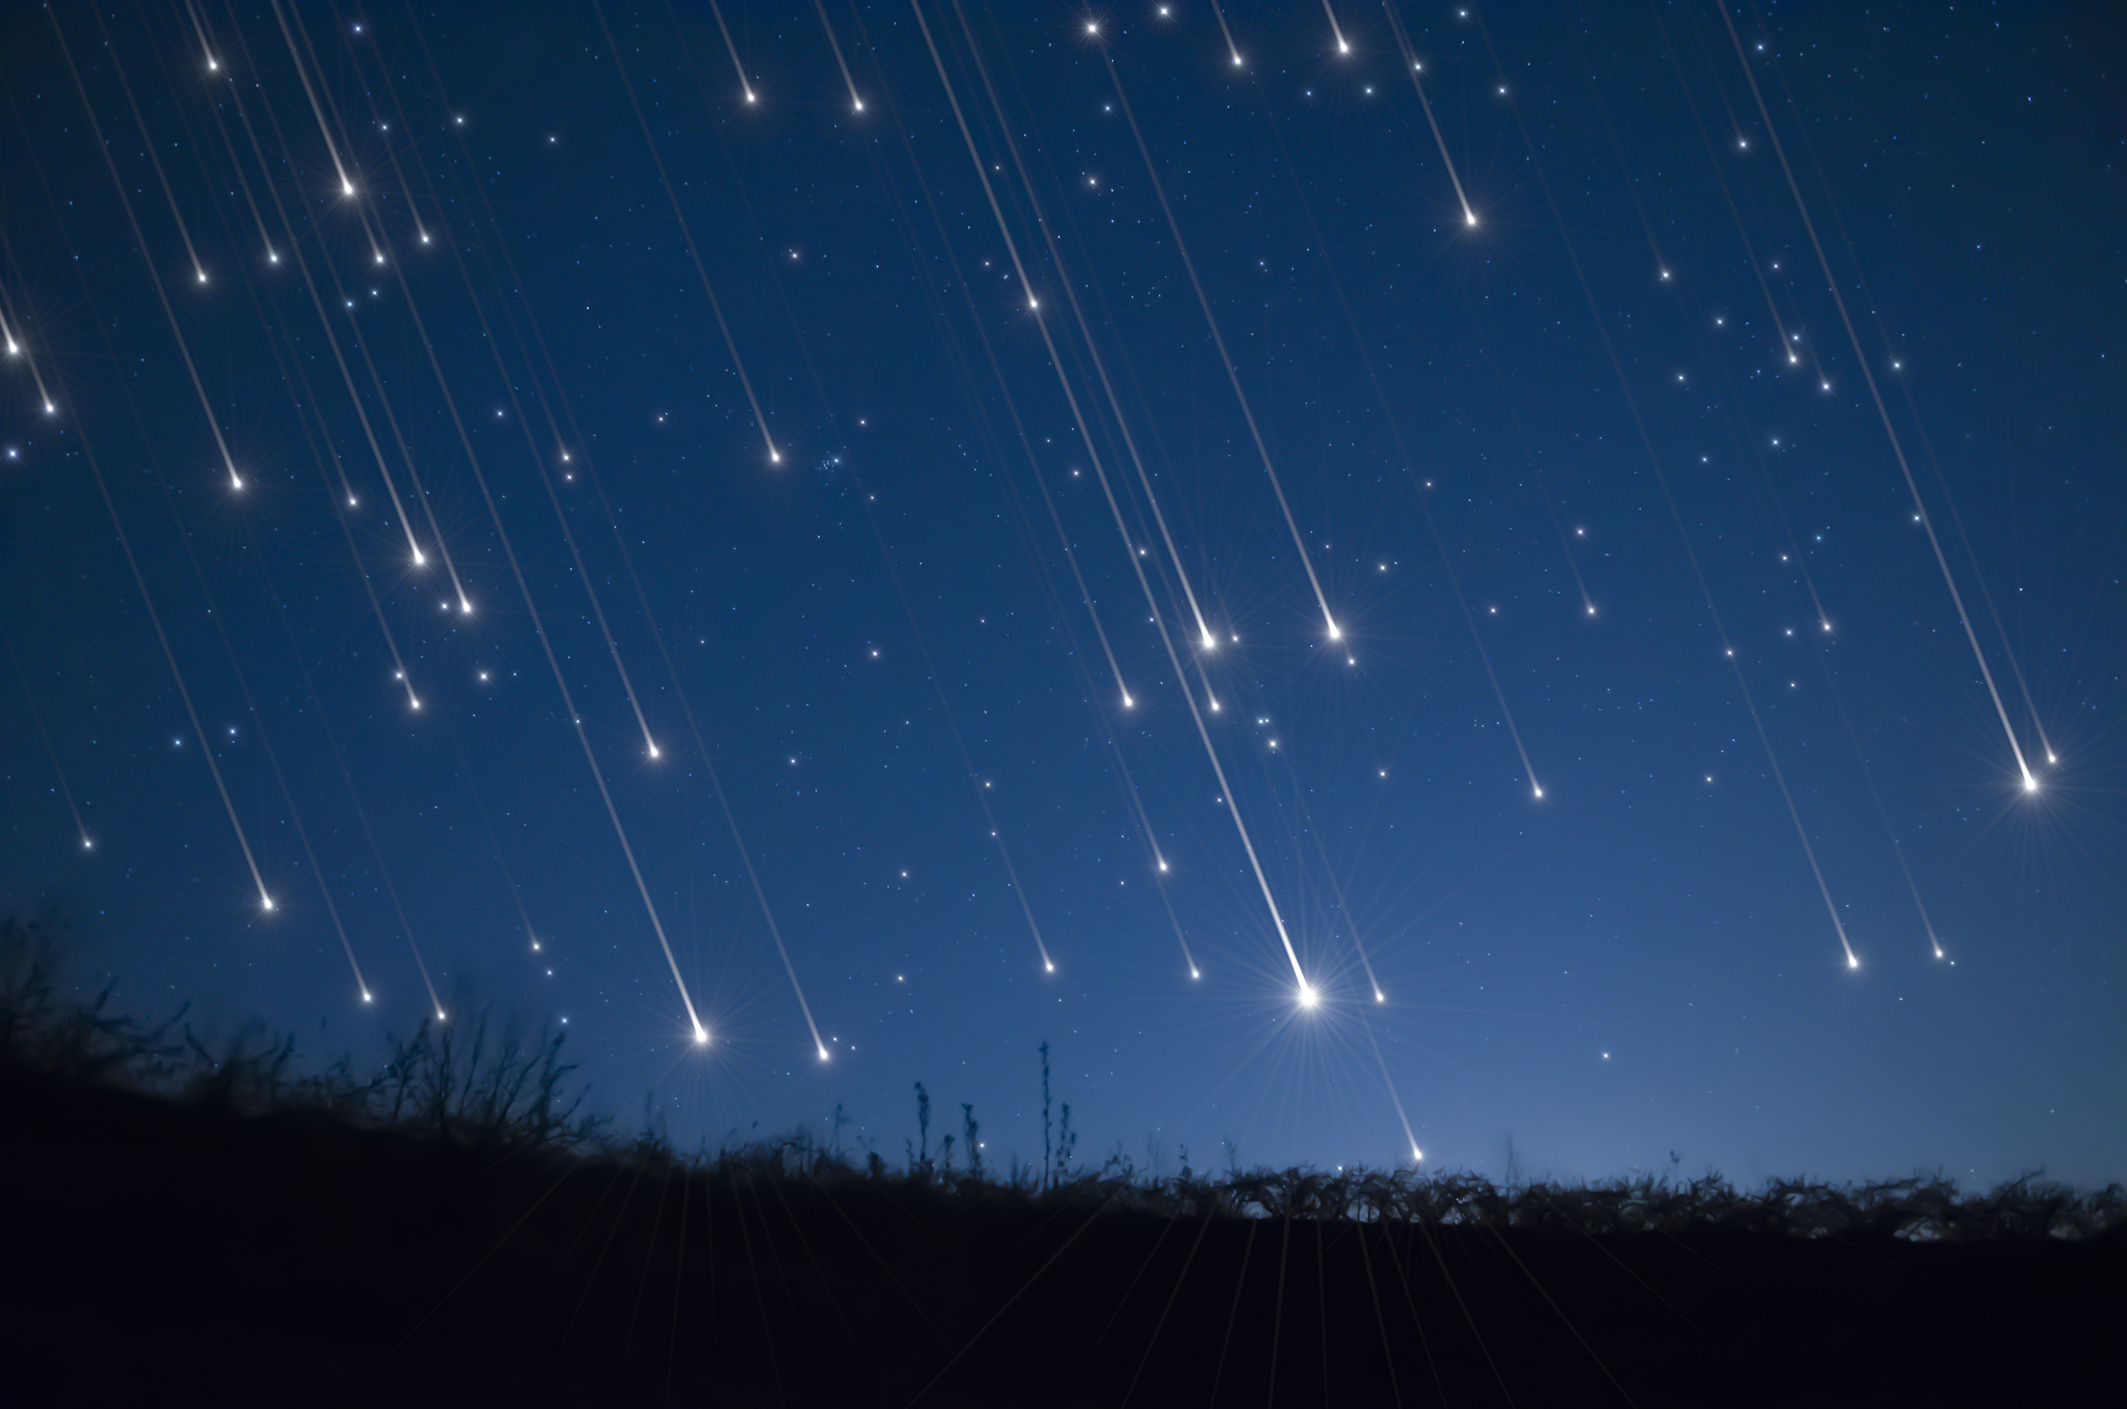 Learn about shooting stars